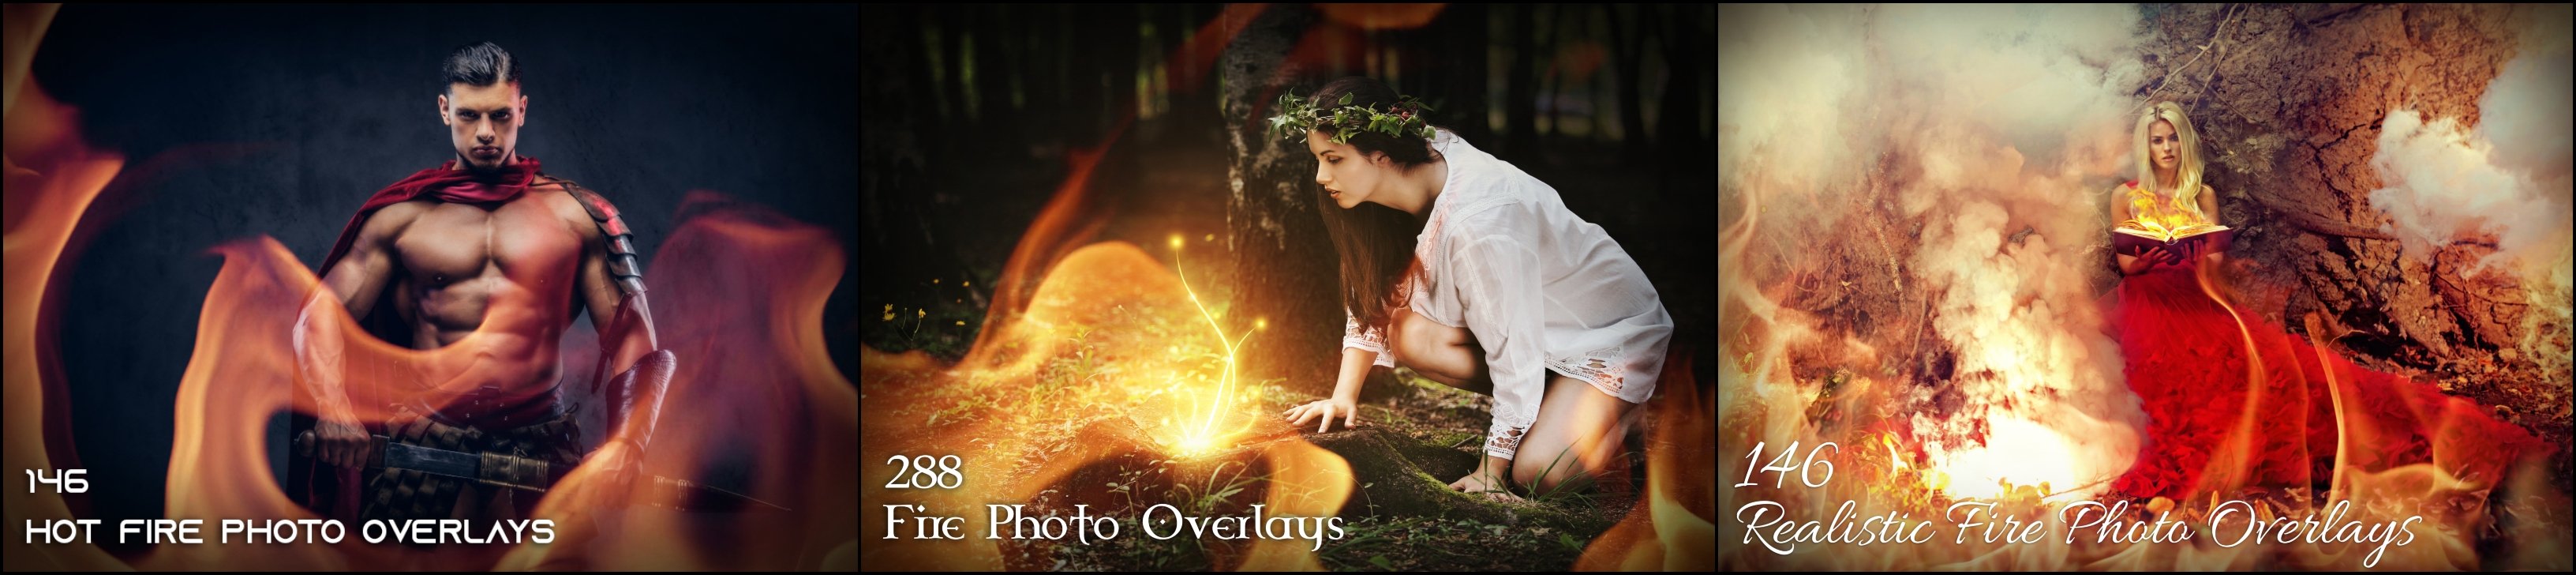 580+ Fire Photo Overlays Packpreview image.